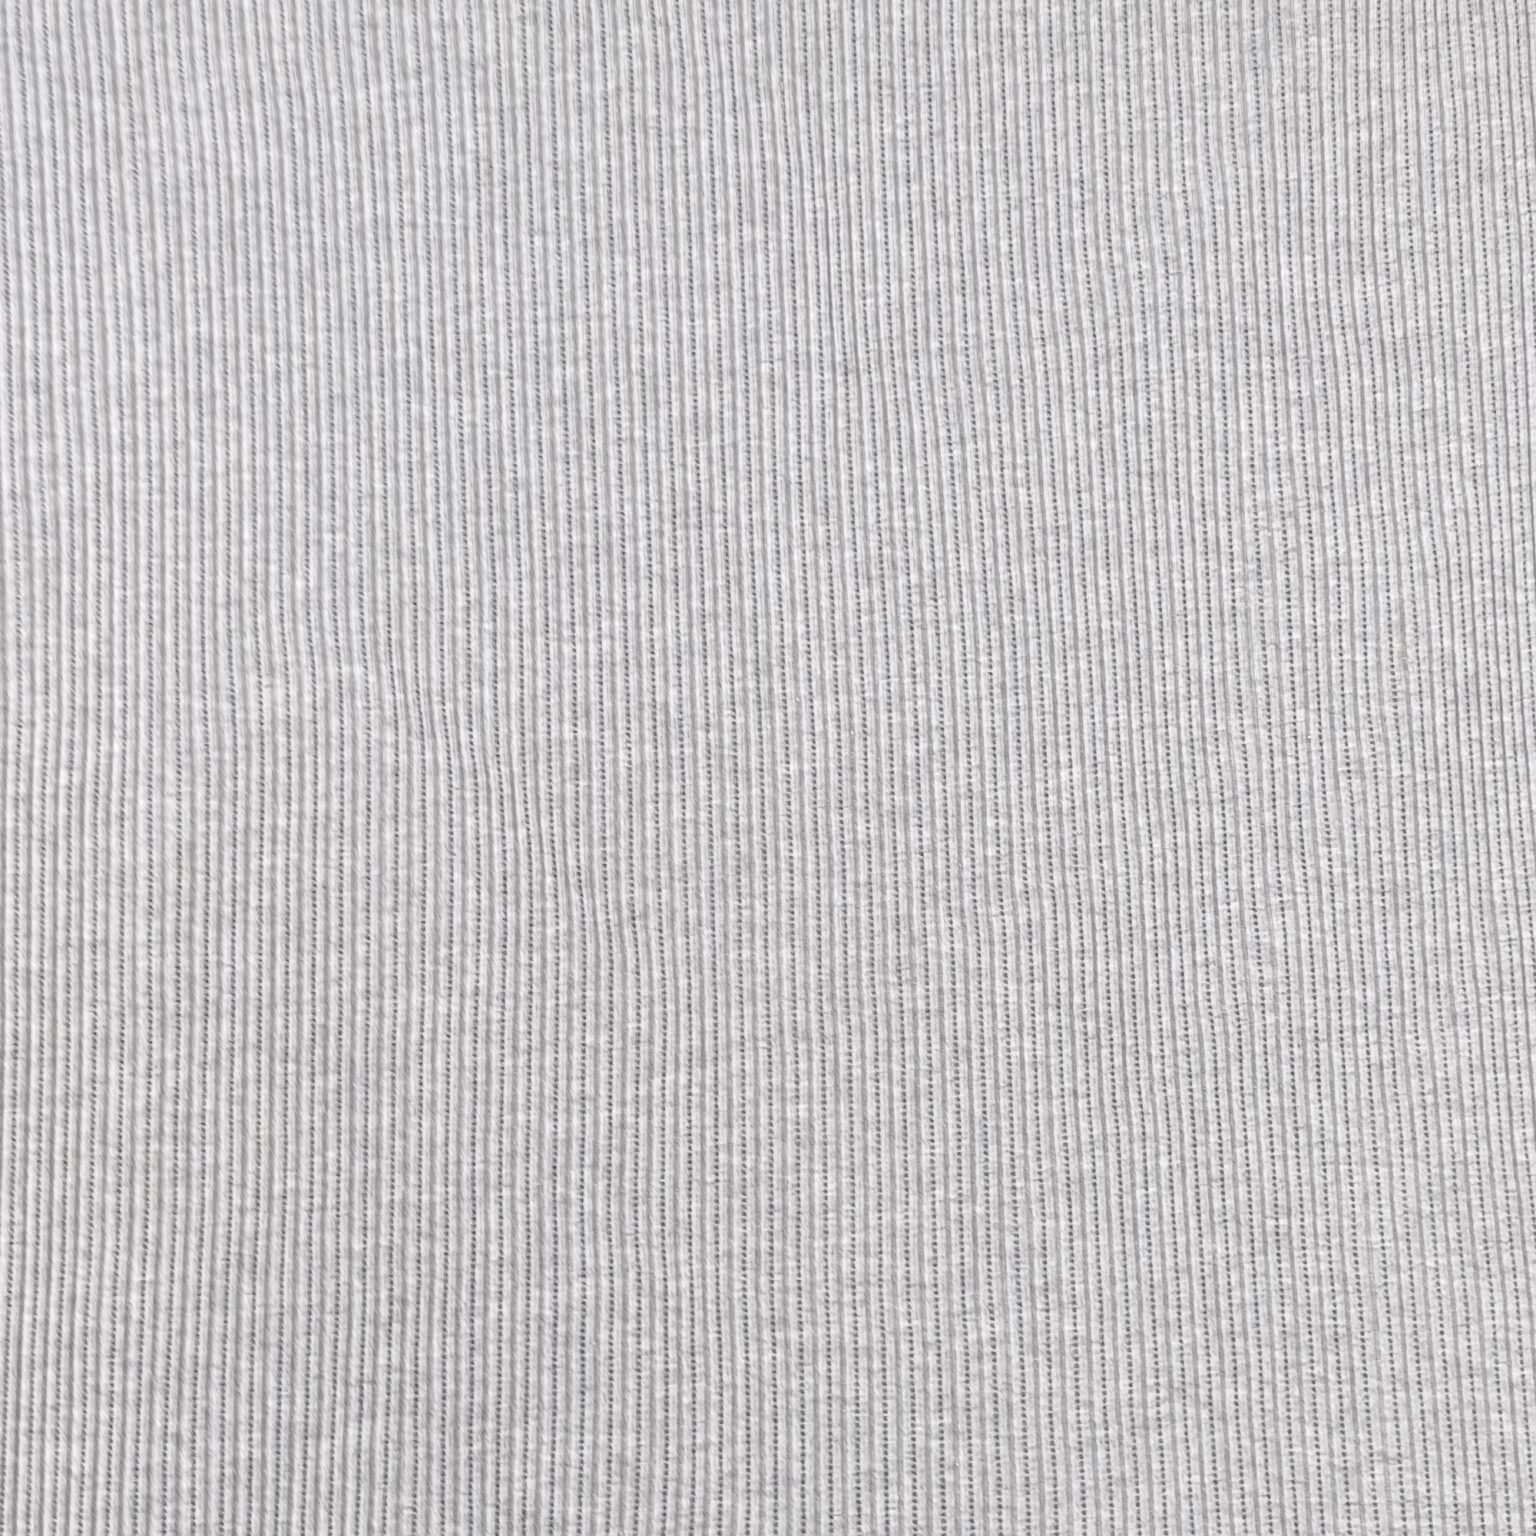 Grey Cable Knit Jersey Fabric | More Sewing